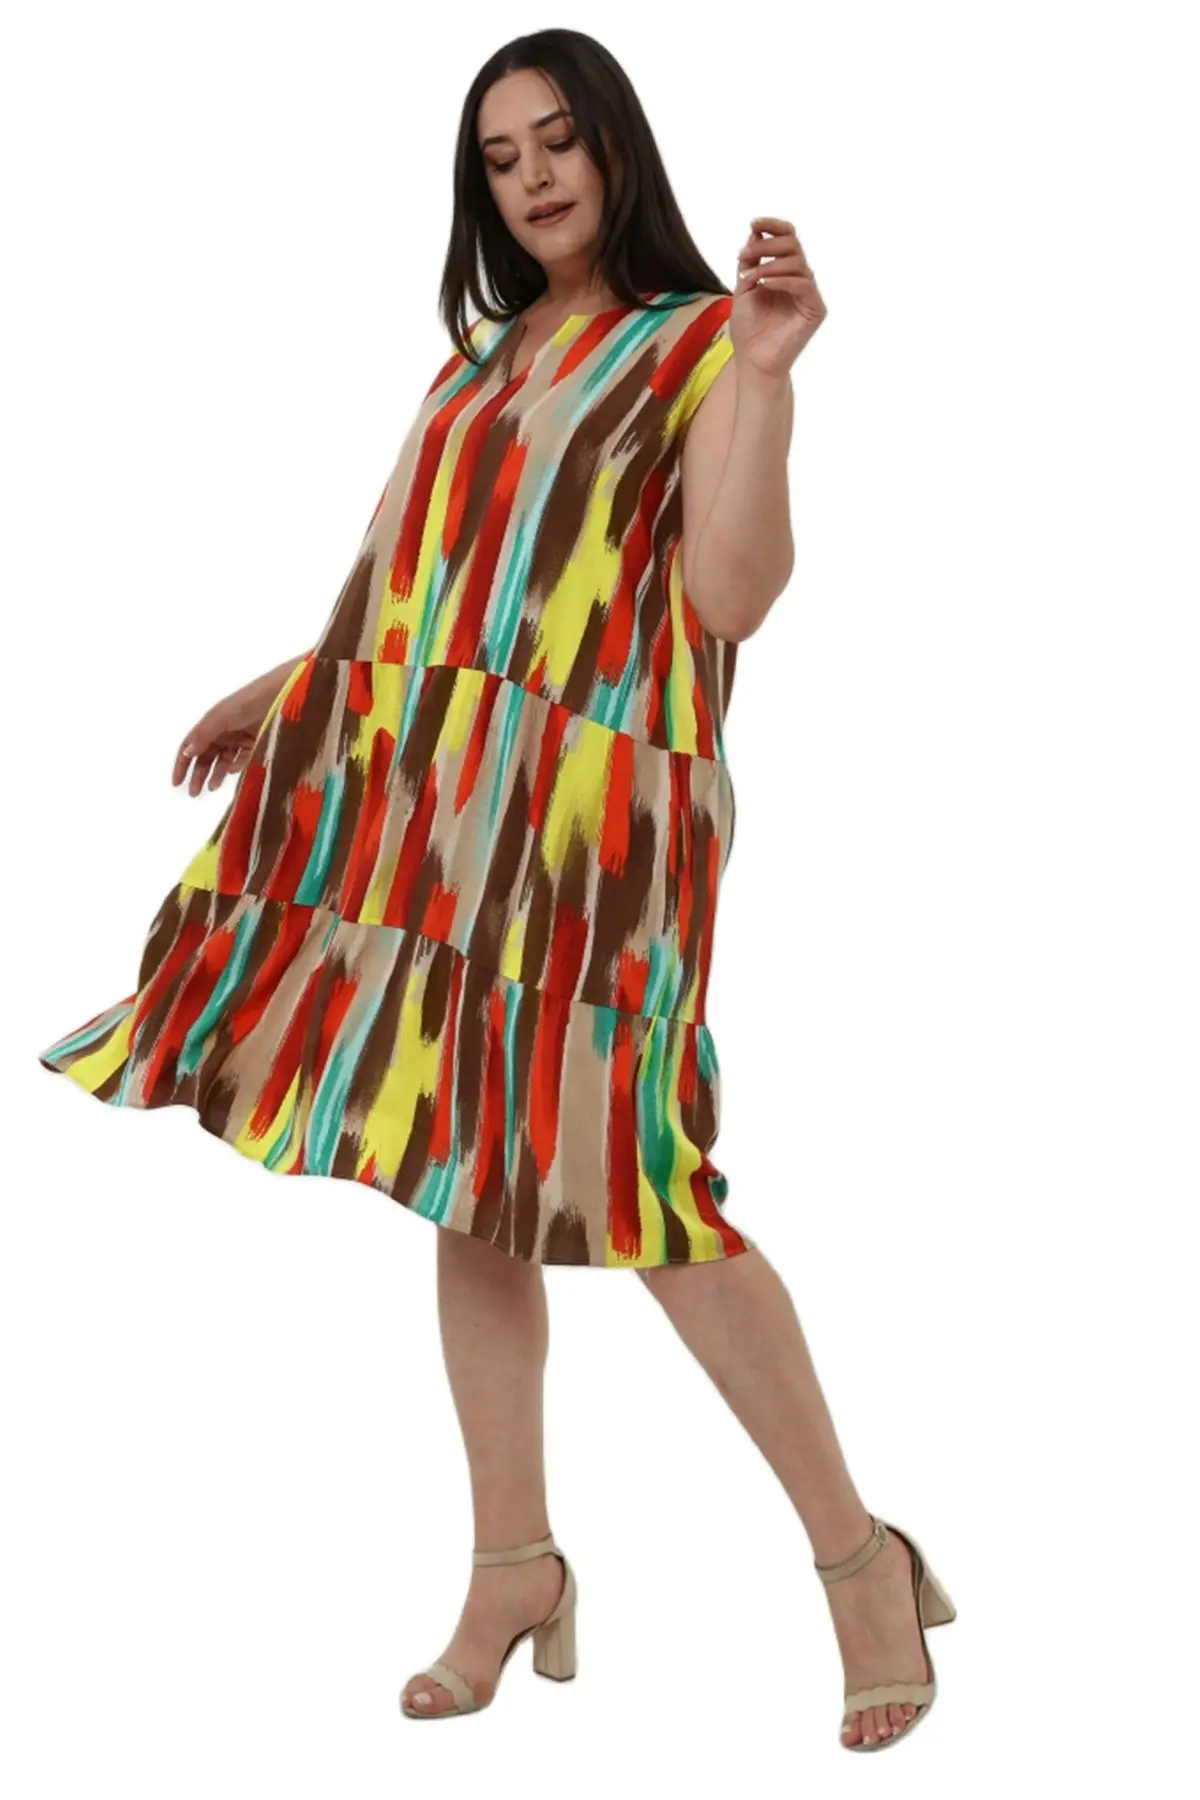 Women’s Plus Size Dress Sleeveless Colorful Print Detail, Designed and Made in Turkey, New Arrival